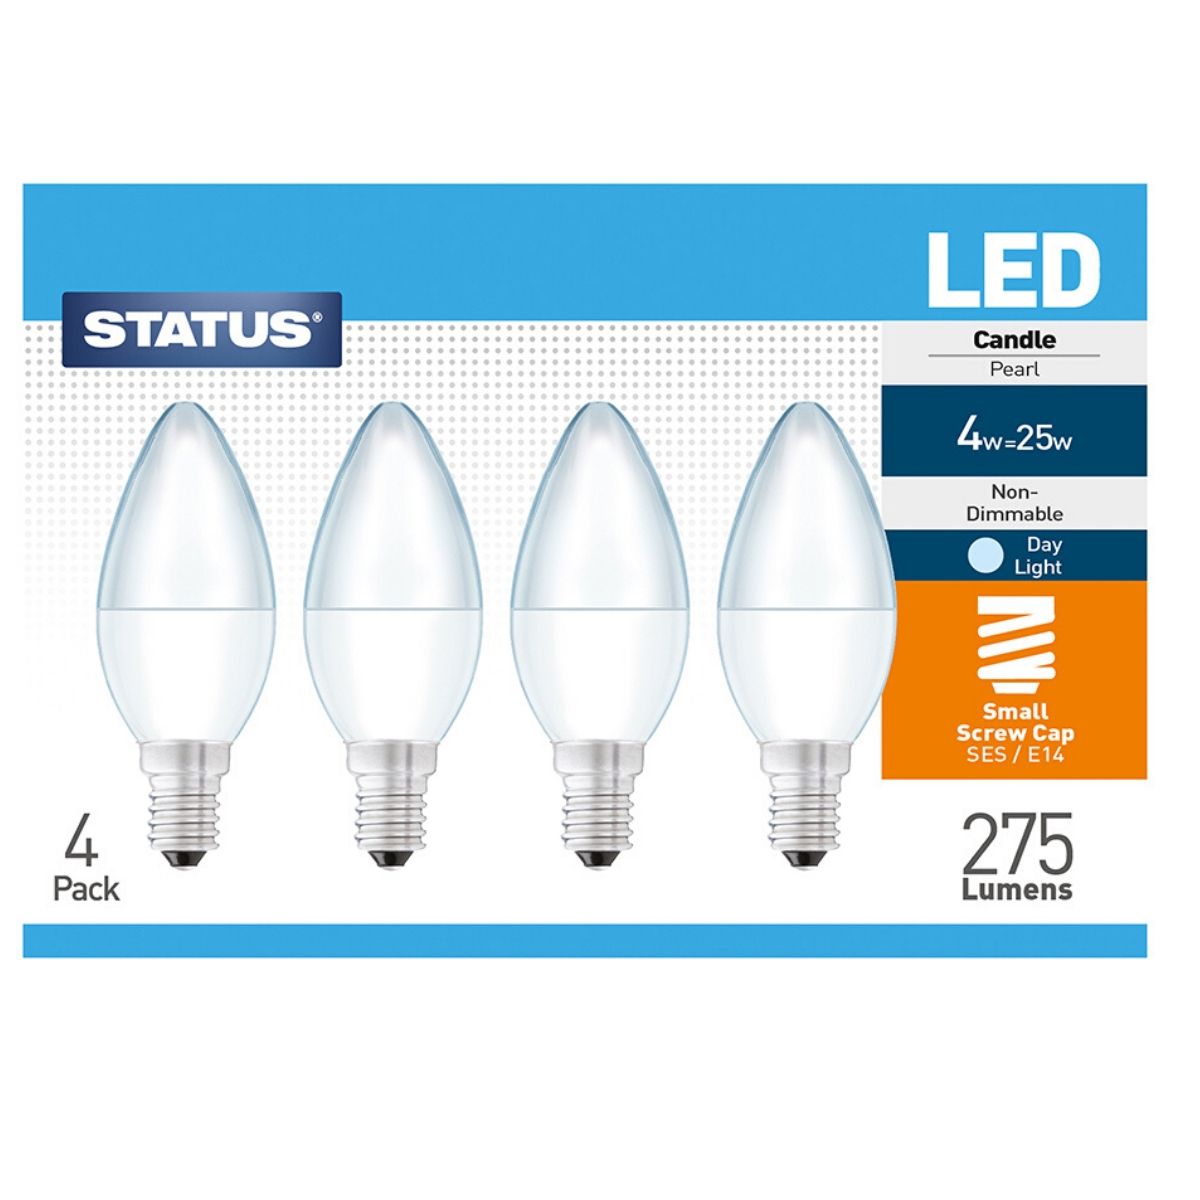 View 4 x E14 LED Candle Bulbs 4w information